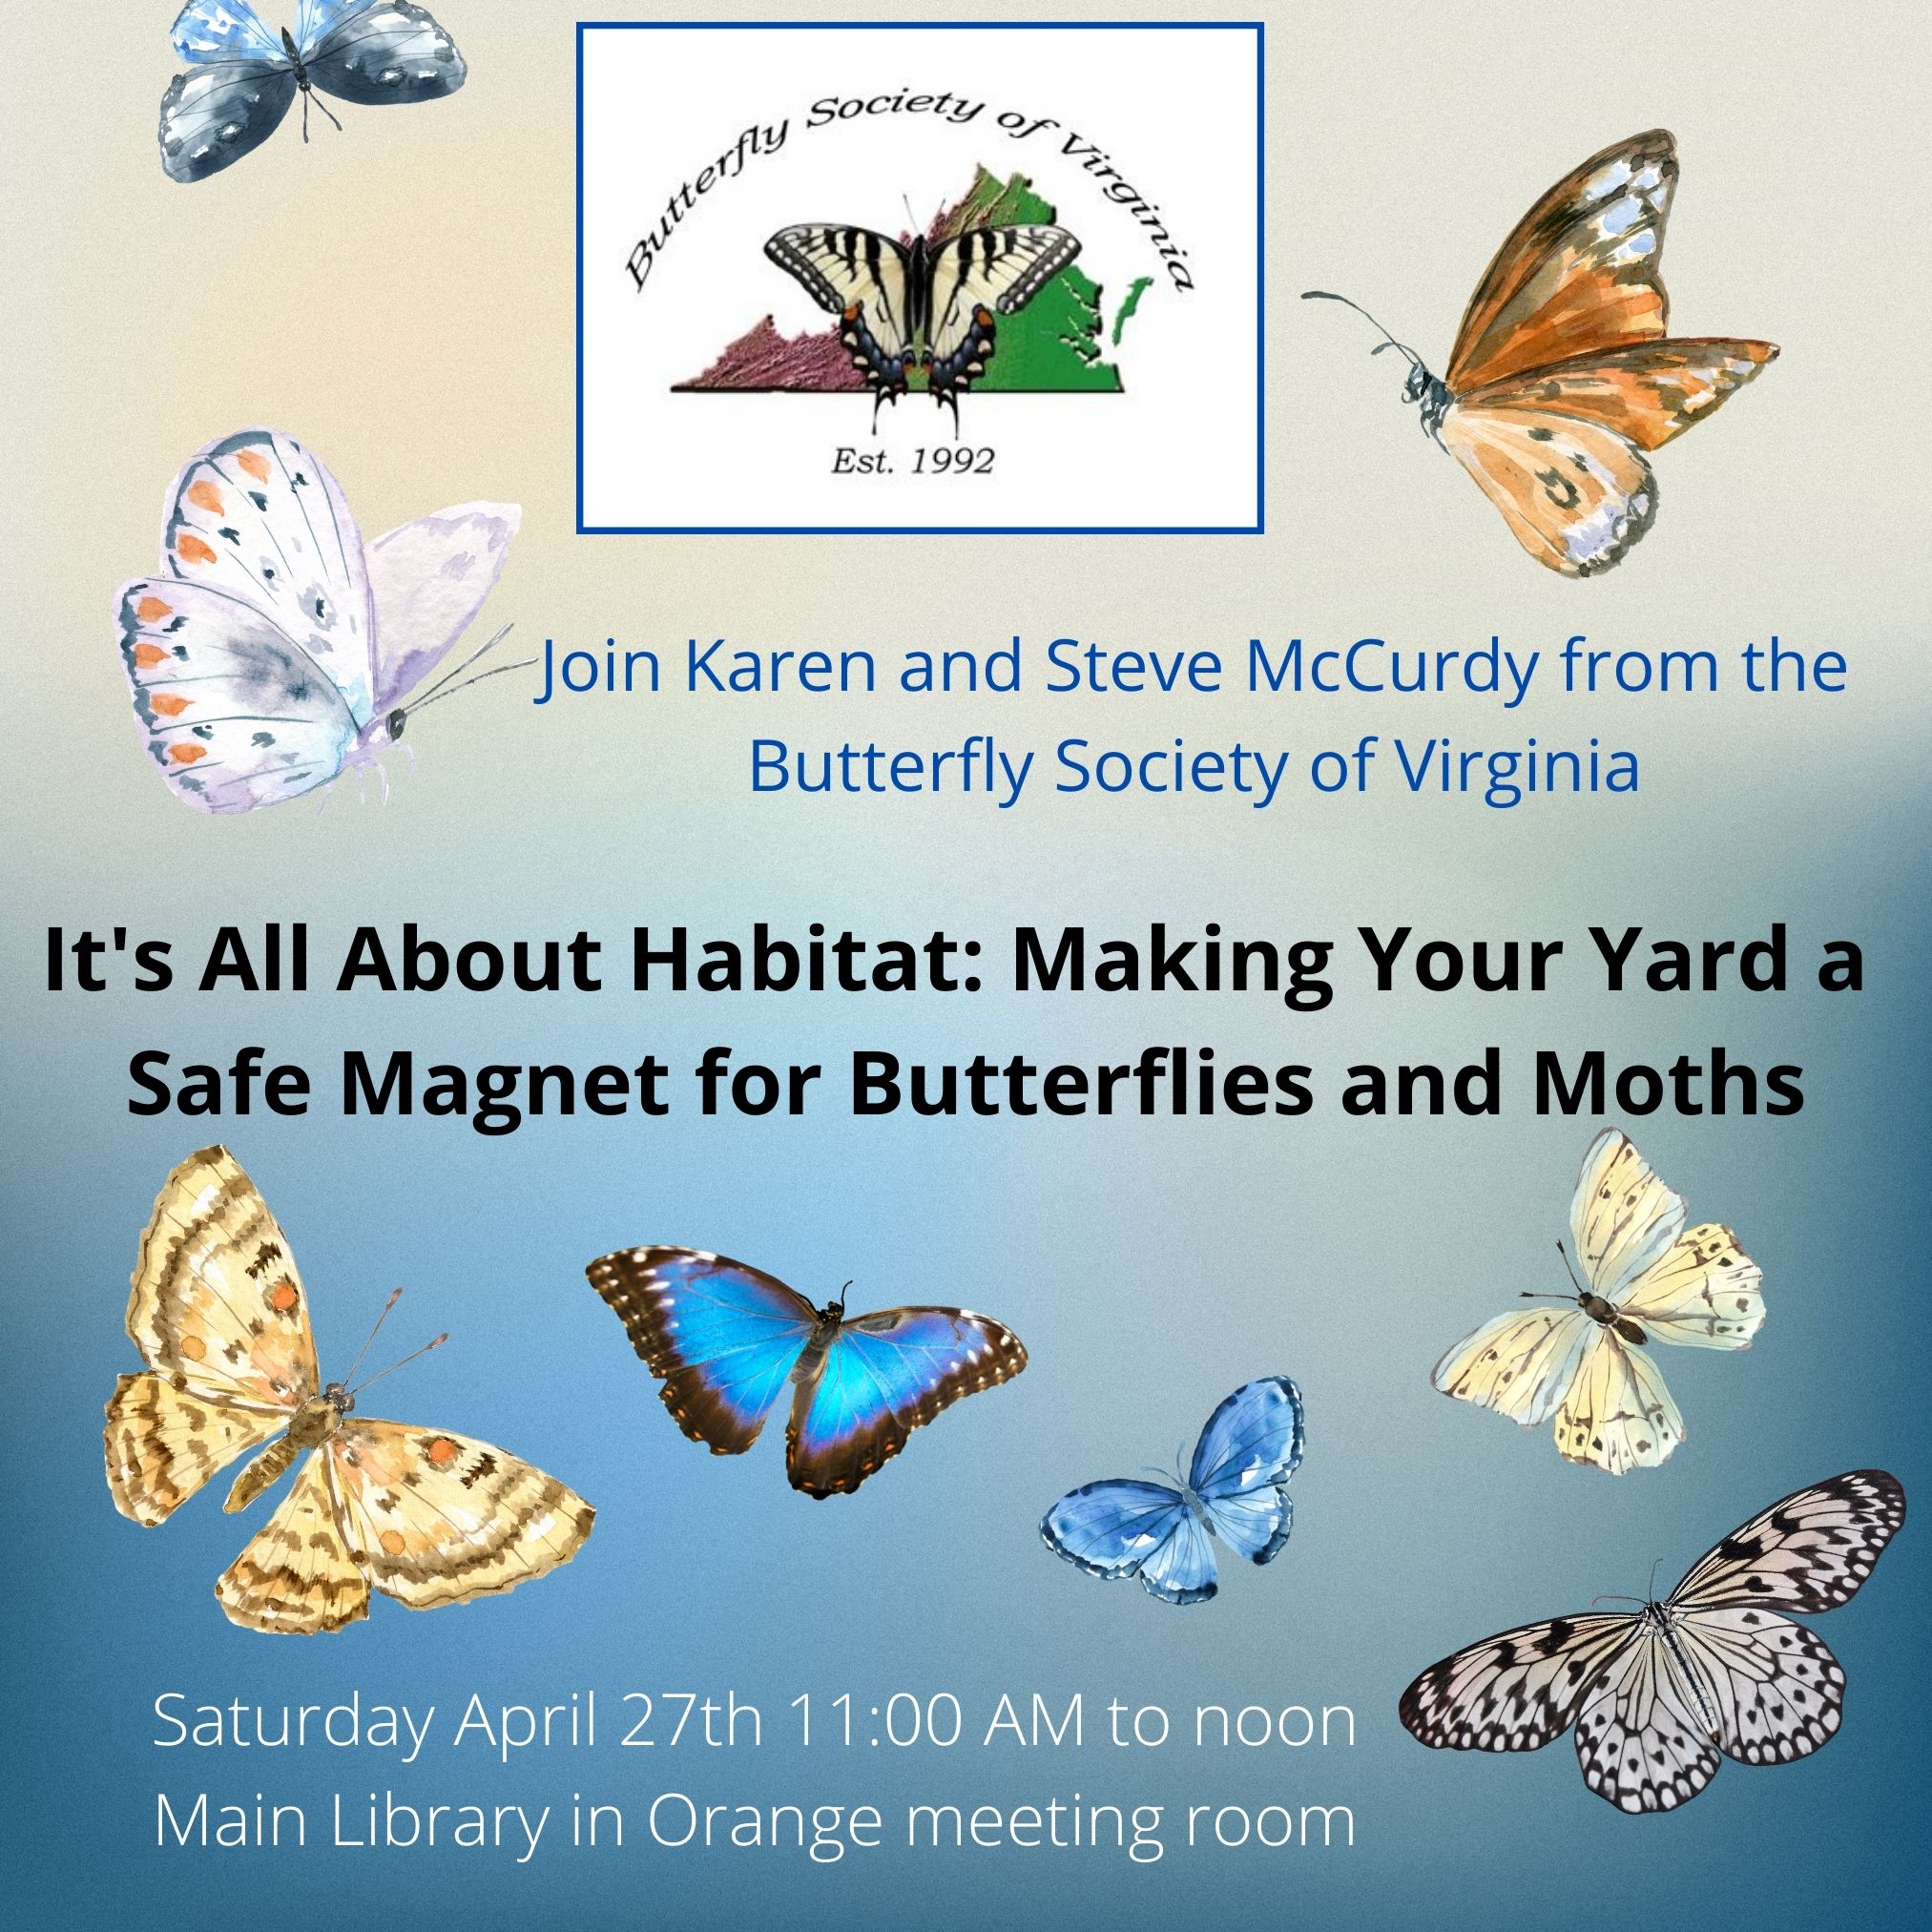 Logo for the Butterfly Society of Virginia. Join Karen and Steve McCurdy from the Butterfly Society of Virginia for their program It's All About Habitat: Making Your Yard a Safe Magnet for Butterflies and Moths Saturday April 27th 11:00 AM to noon Main Library in Orange meeting room.